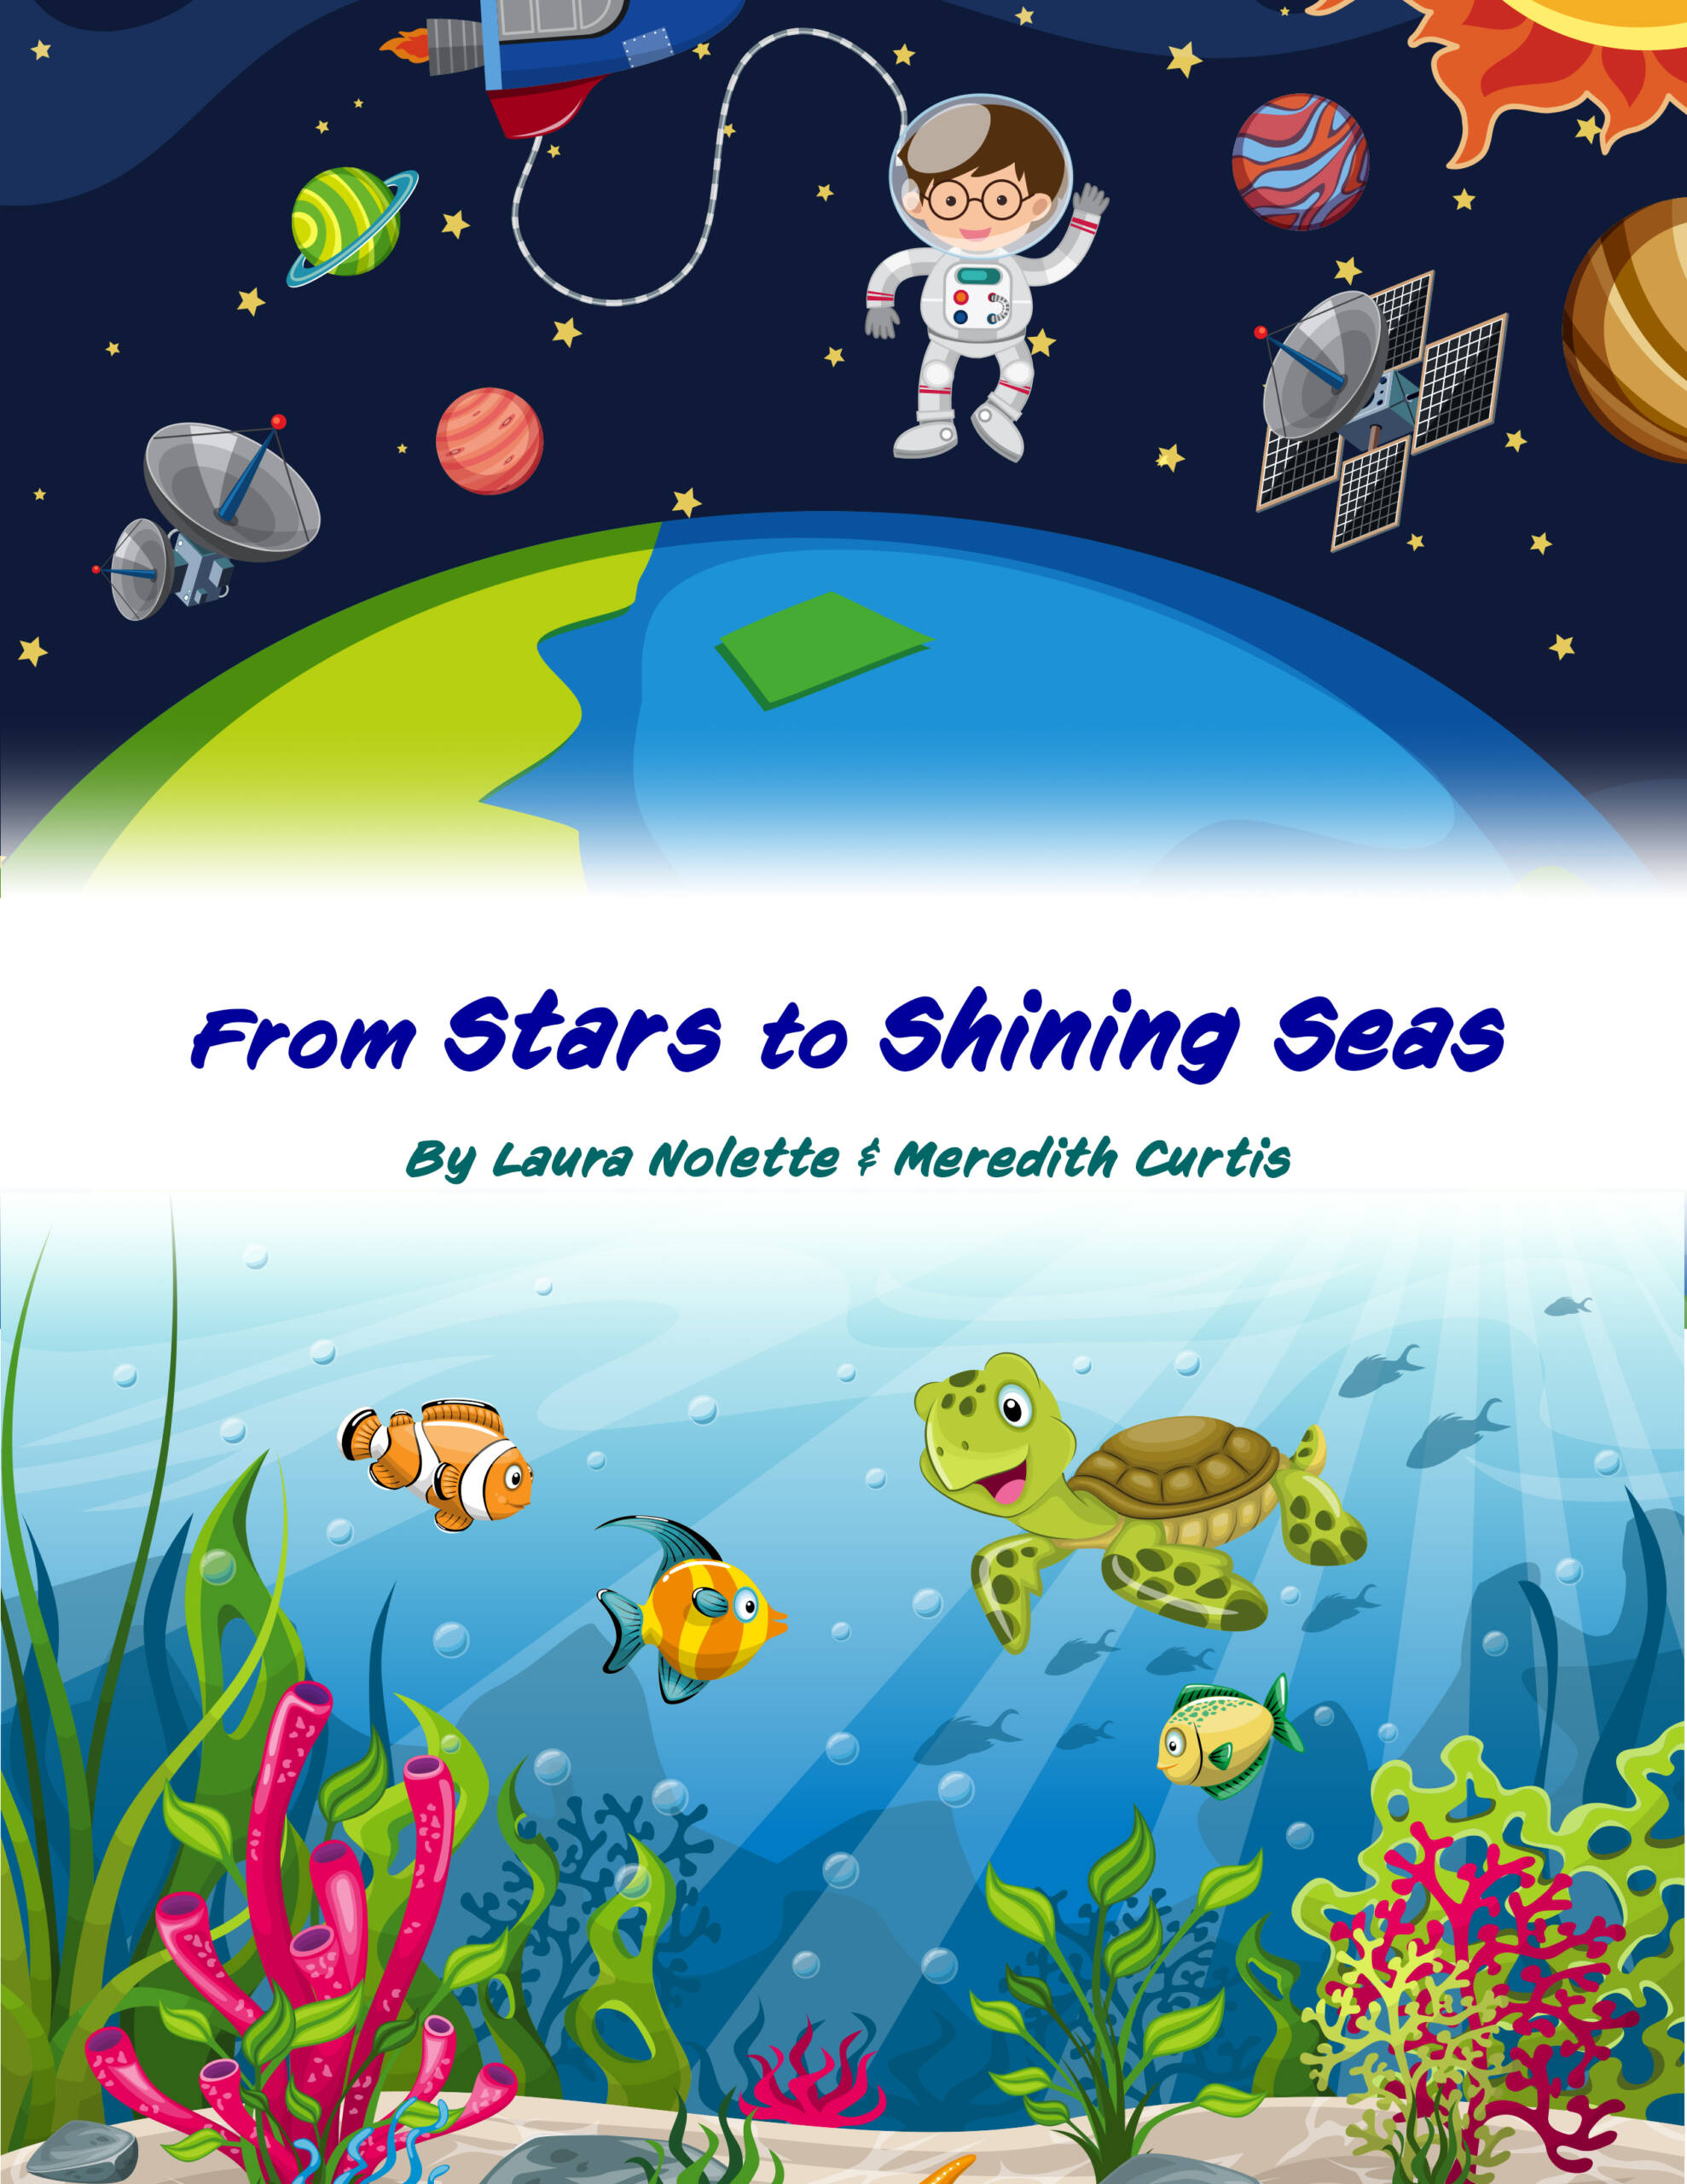 From Stars to Shining Seas by Laura Nolette & Meredith Curtis Front Cover